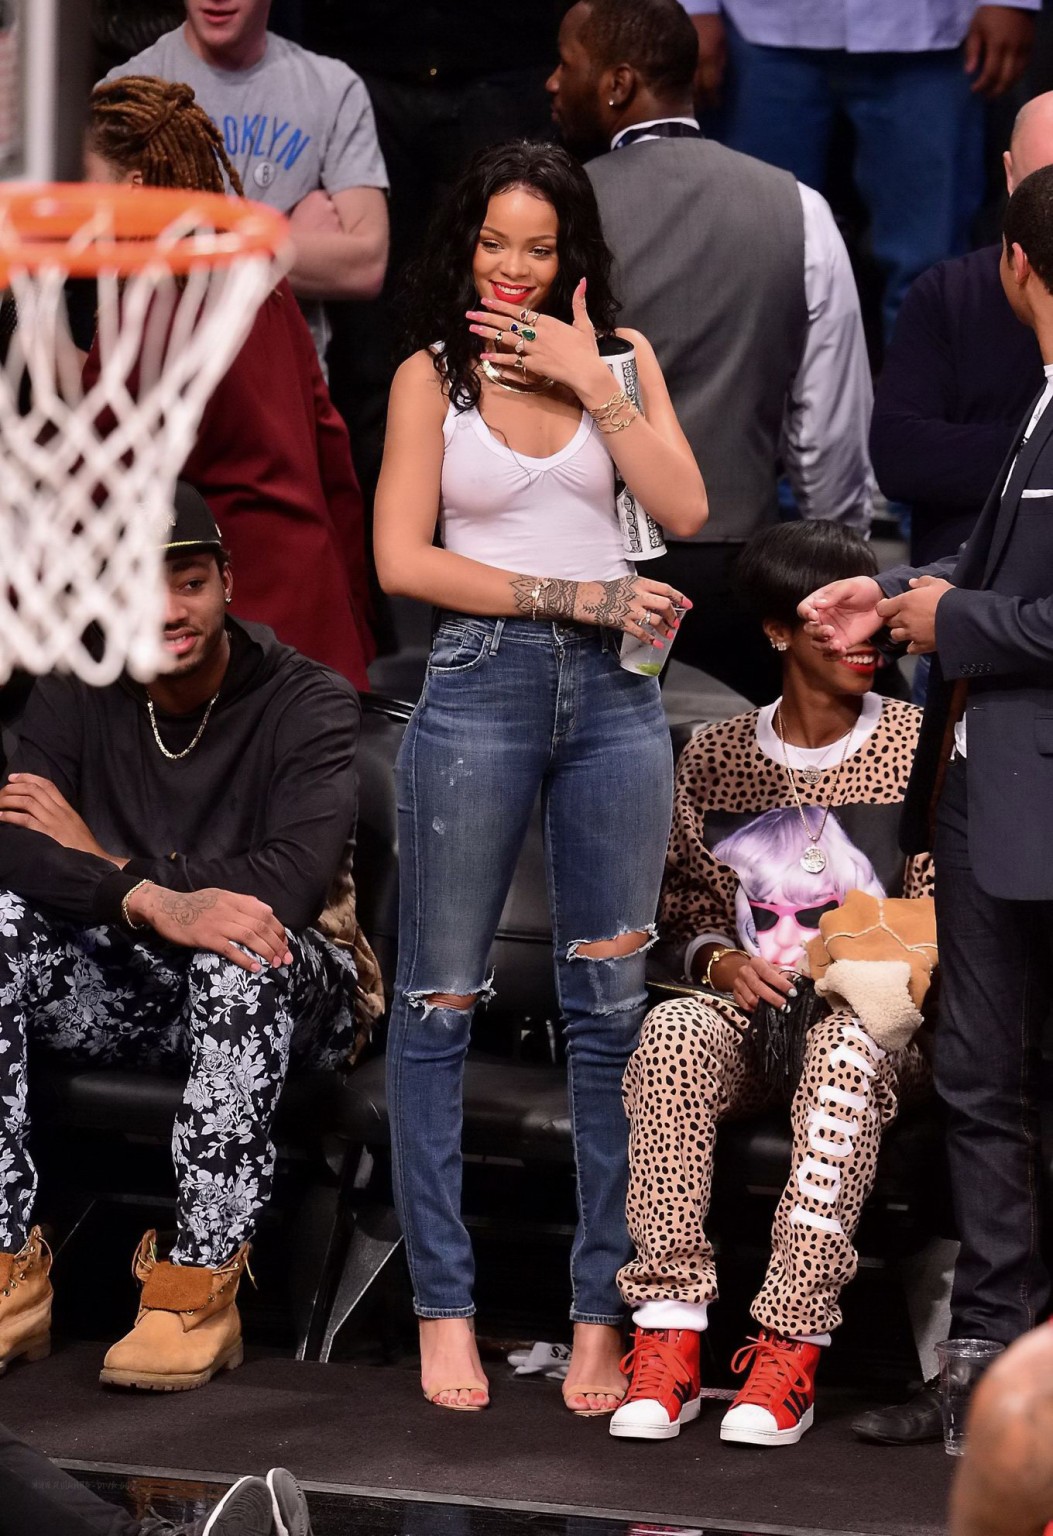 Rihanna shows off her boobs in seethru top at a basketball game in NYC #75198007